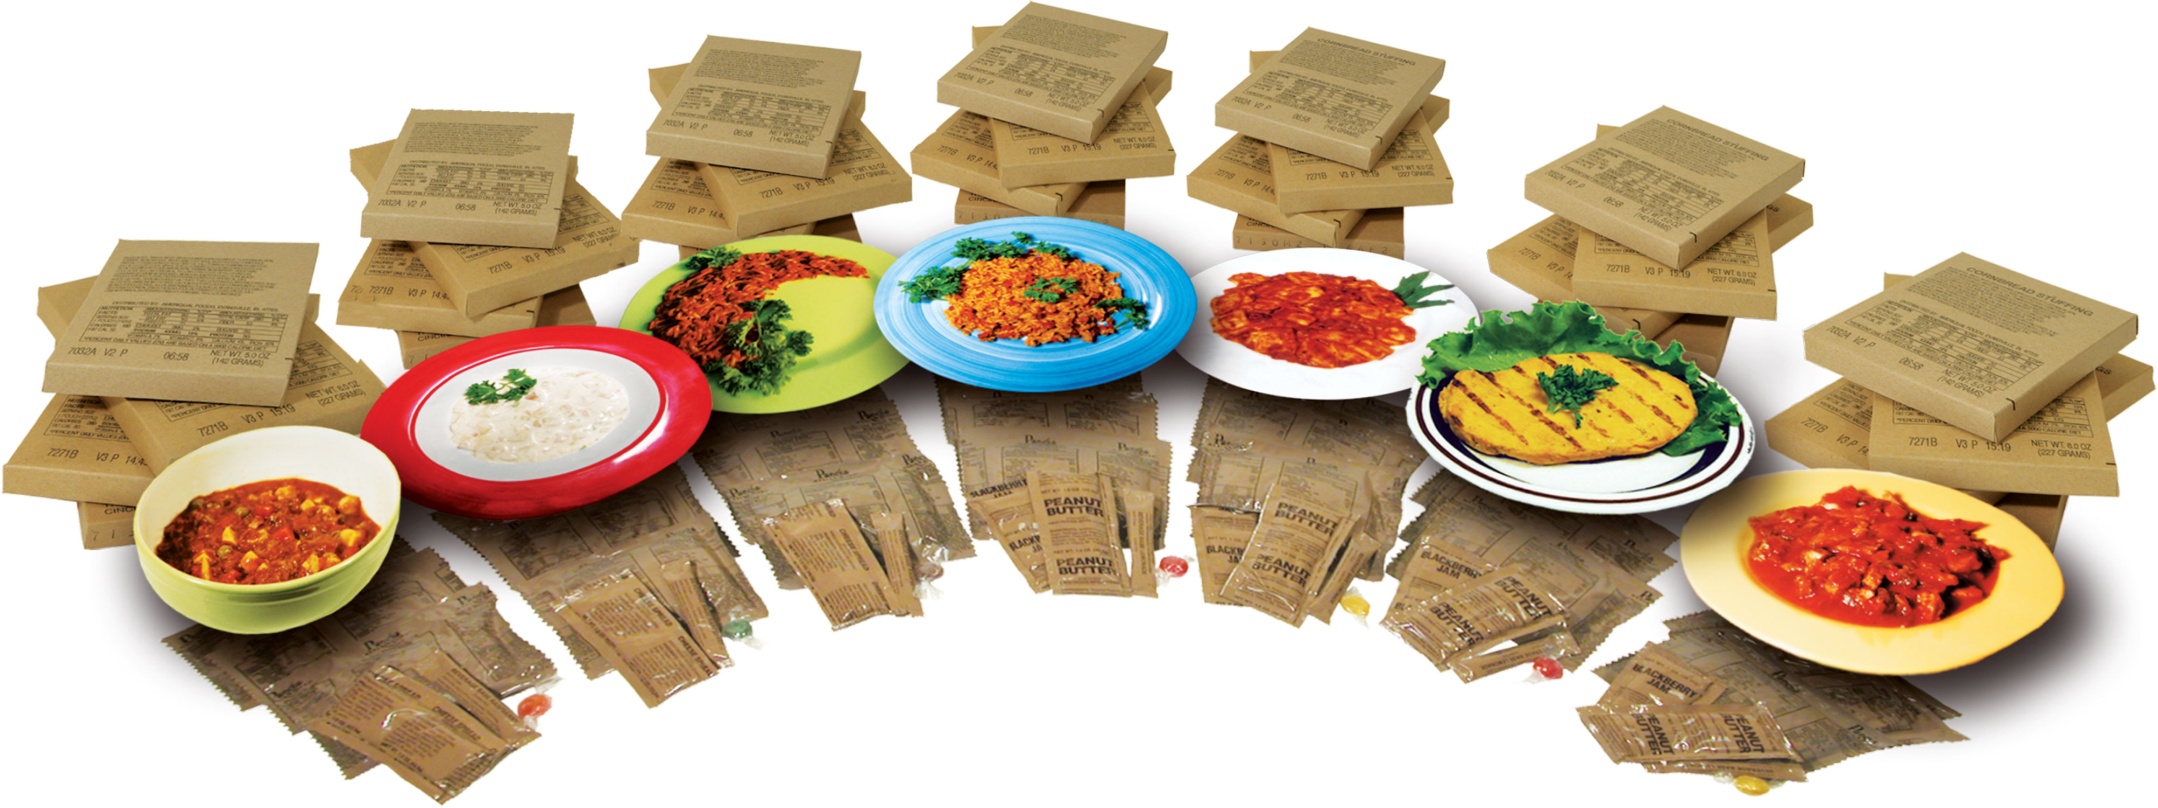 Ready to eat meals (MRE)